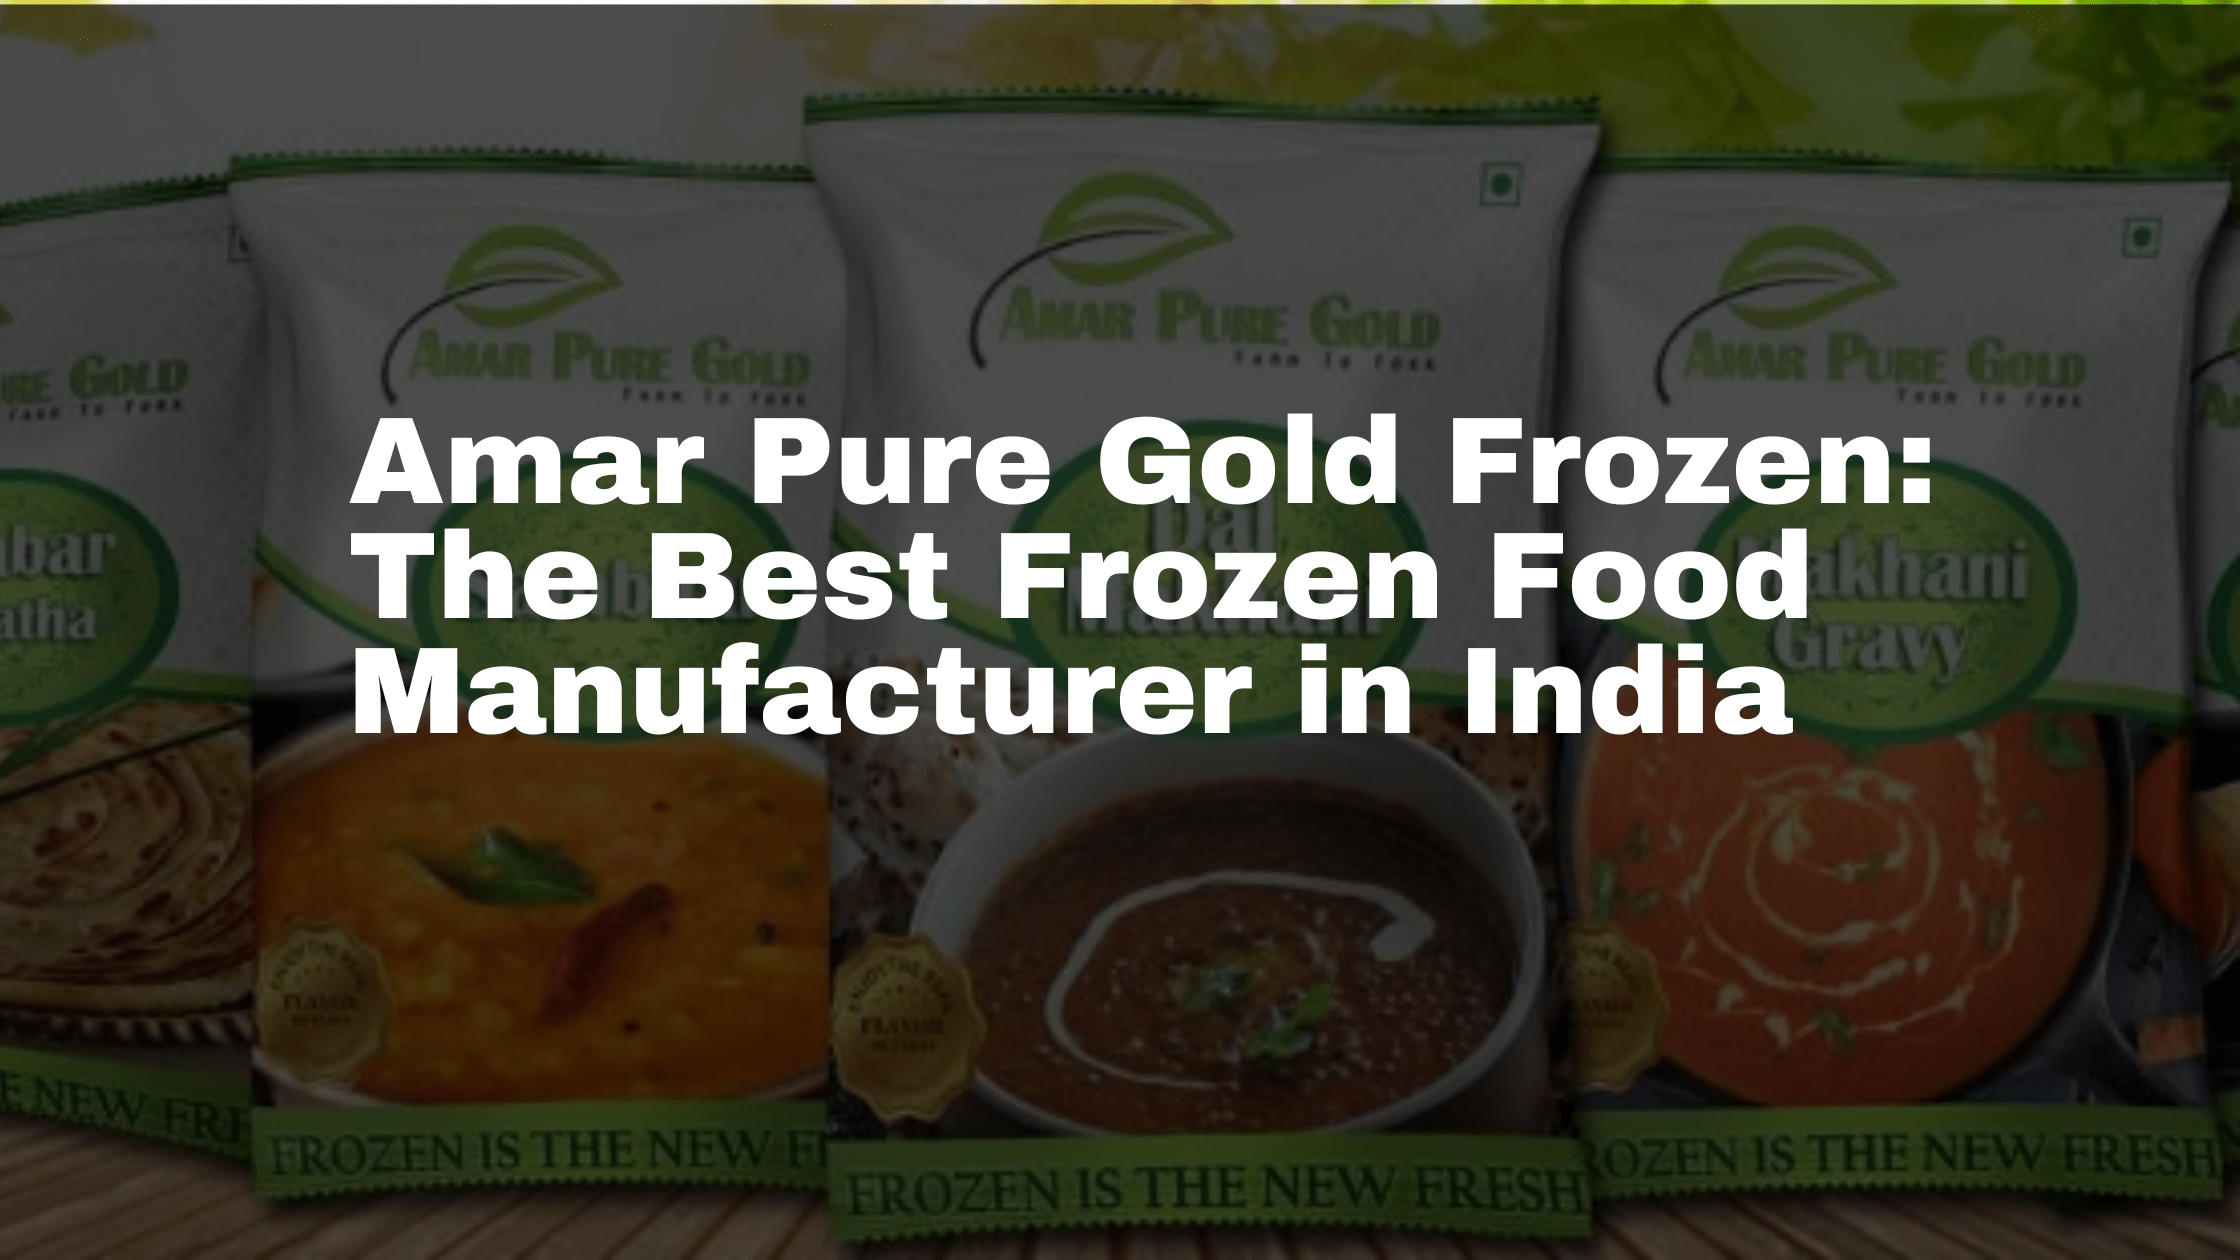 Amar Pure Gold: The Best Frozen Food Manufacturer in India